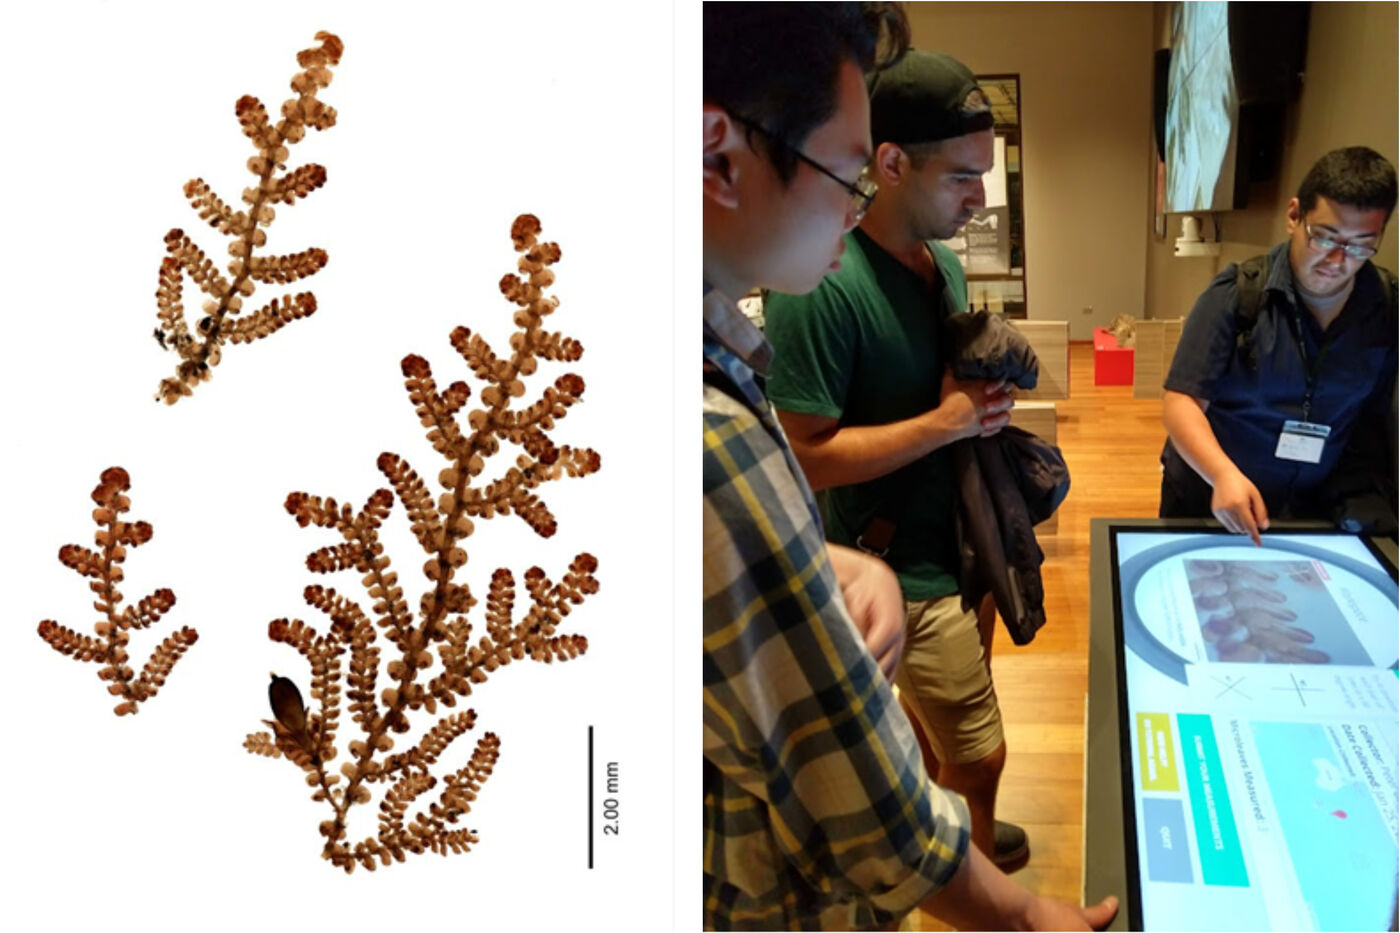 On the left, the microscopic leaves of a liverwort, a primitive plant that helps scientists track climate change. On the right, Three people working on a community science platform in an exhibit at the Field Museum.